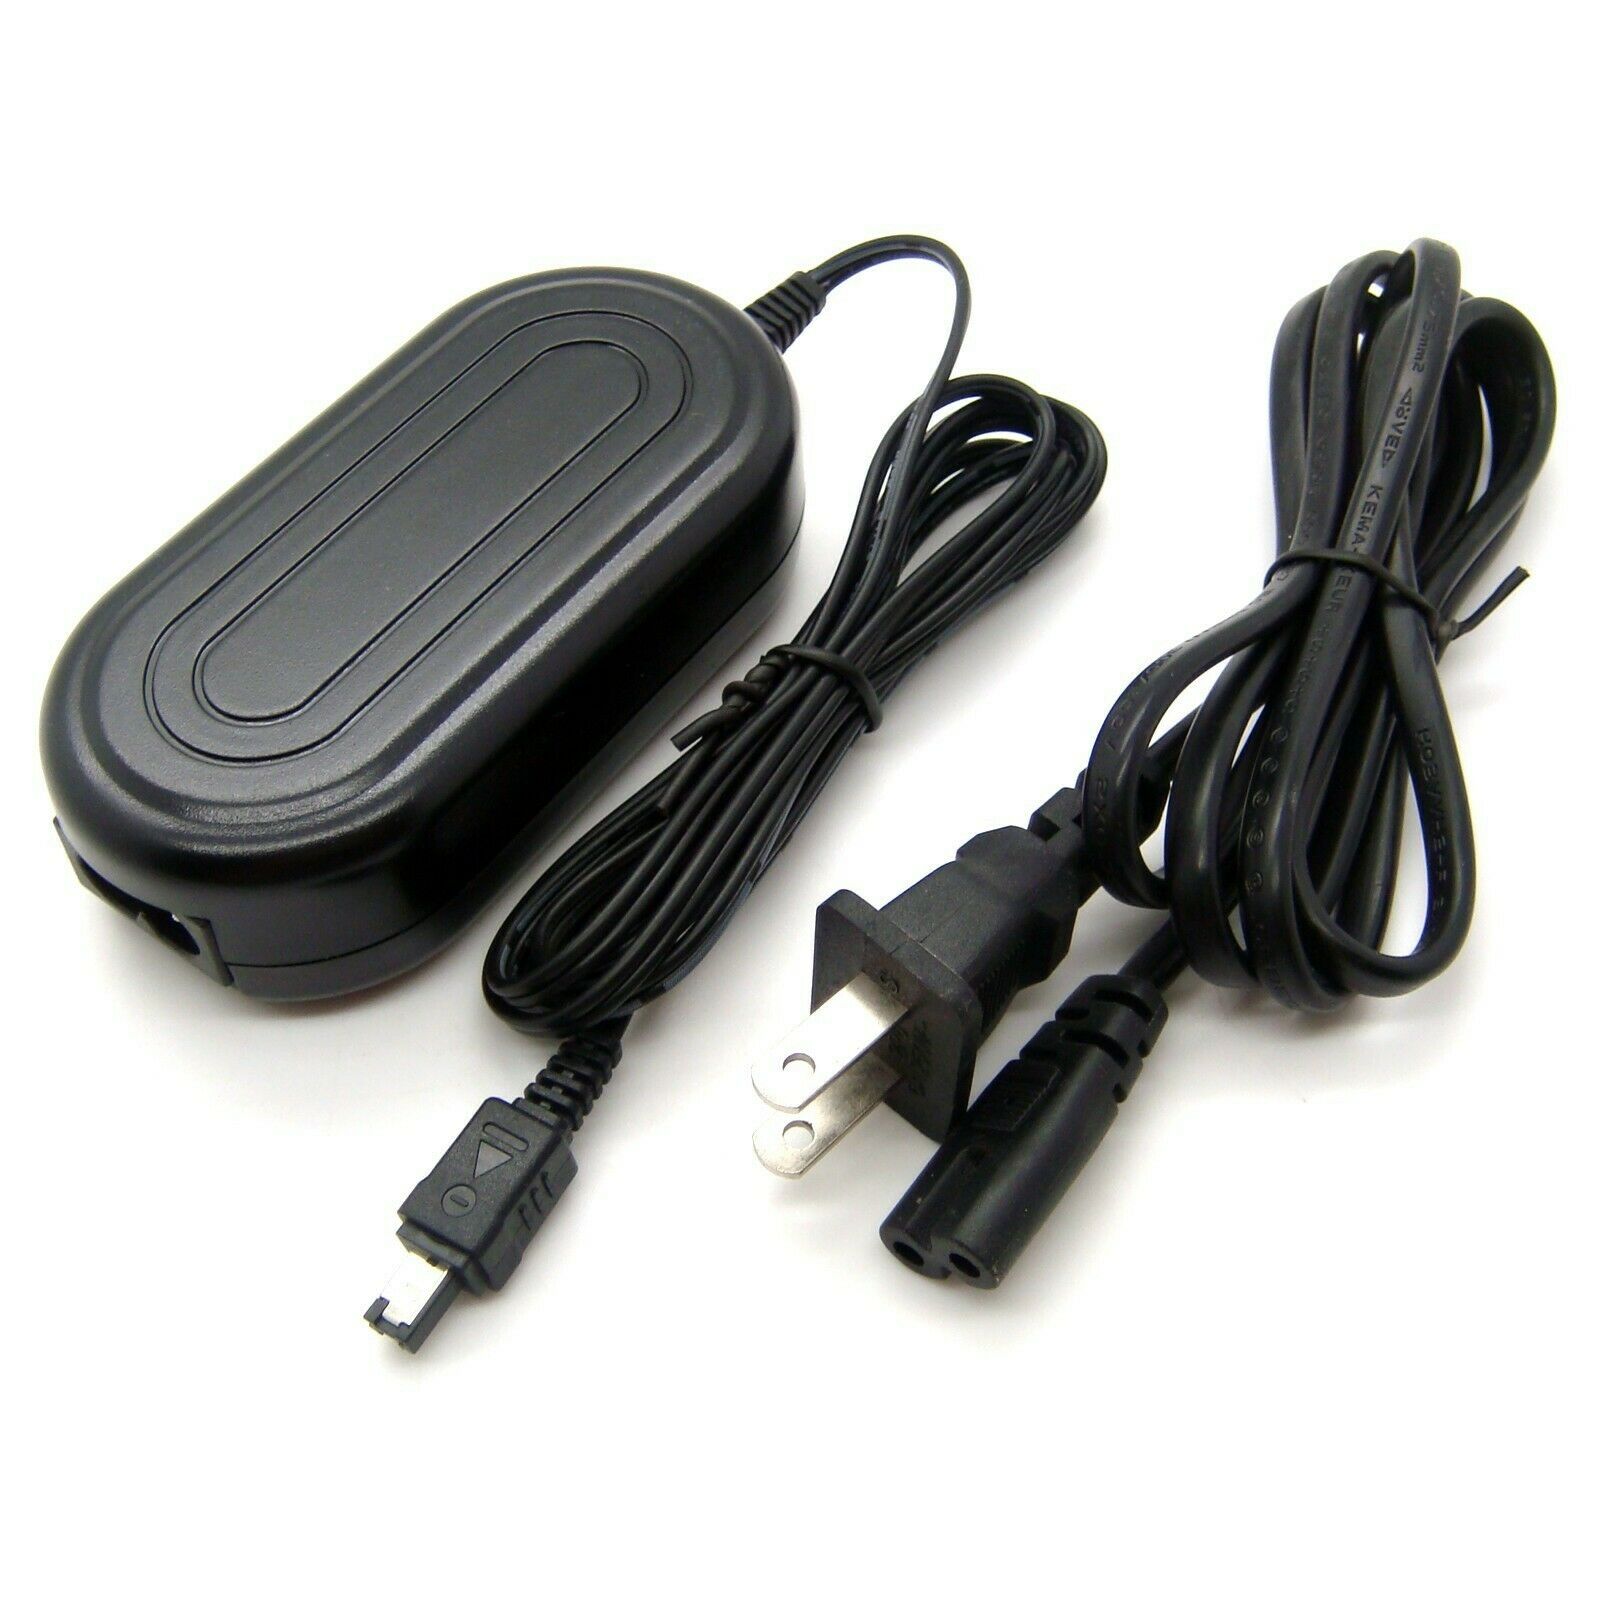 JVC GZ-MG333 Ac Adapter Power Supply Cord Cable Charger